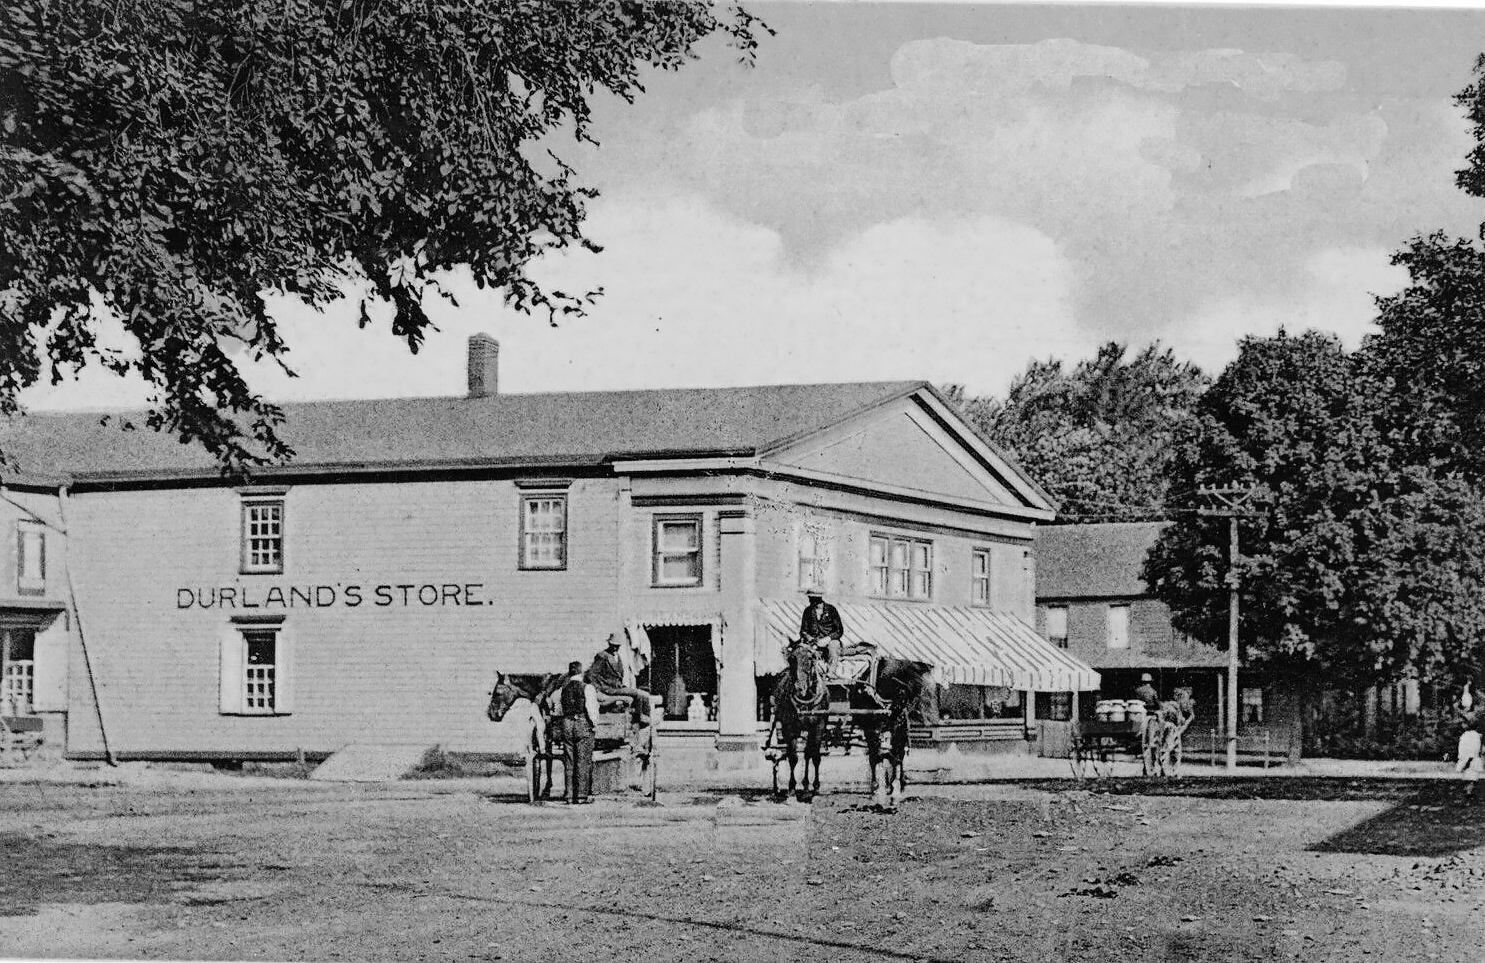 Durland's General Store, Chester NY, Orange County c1903